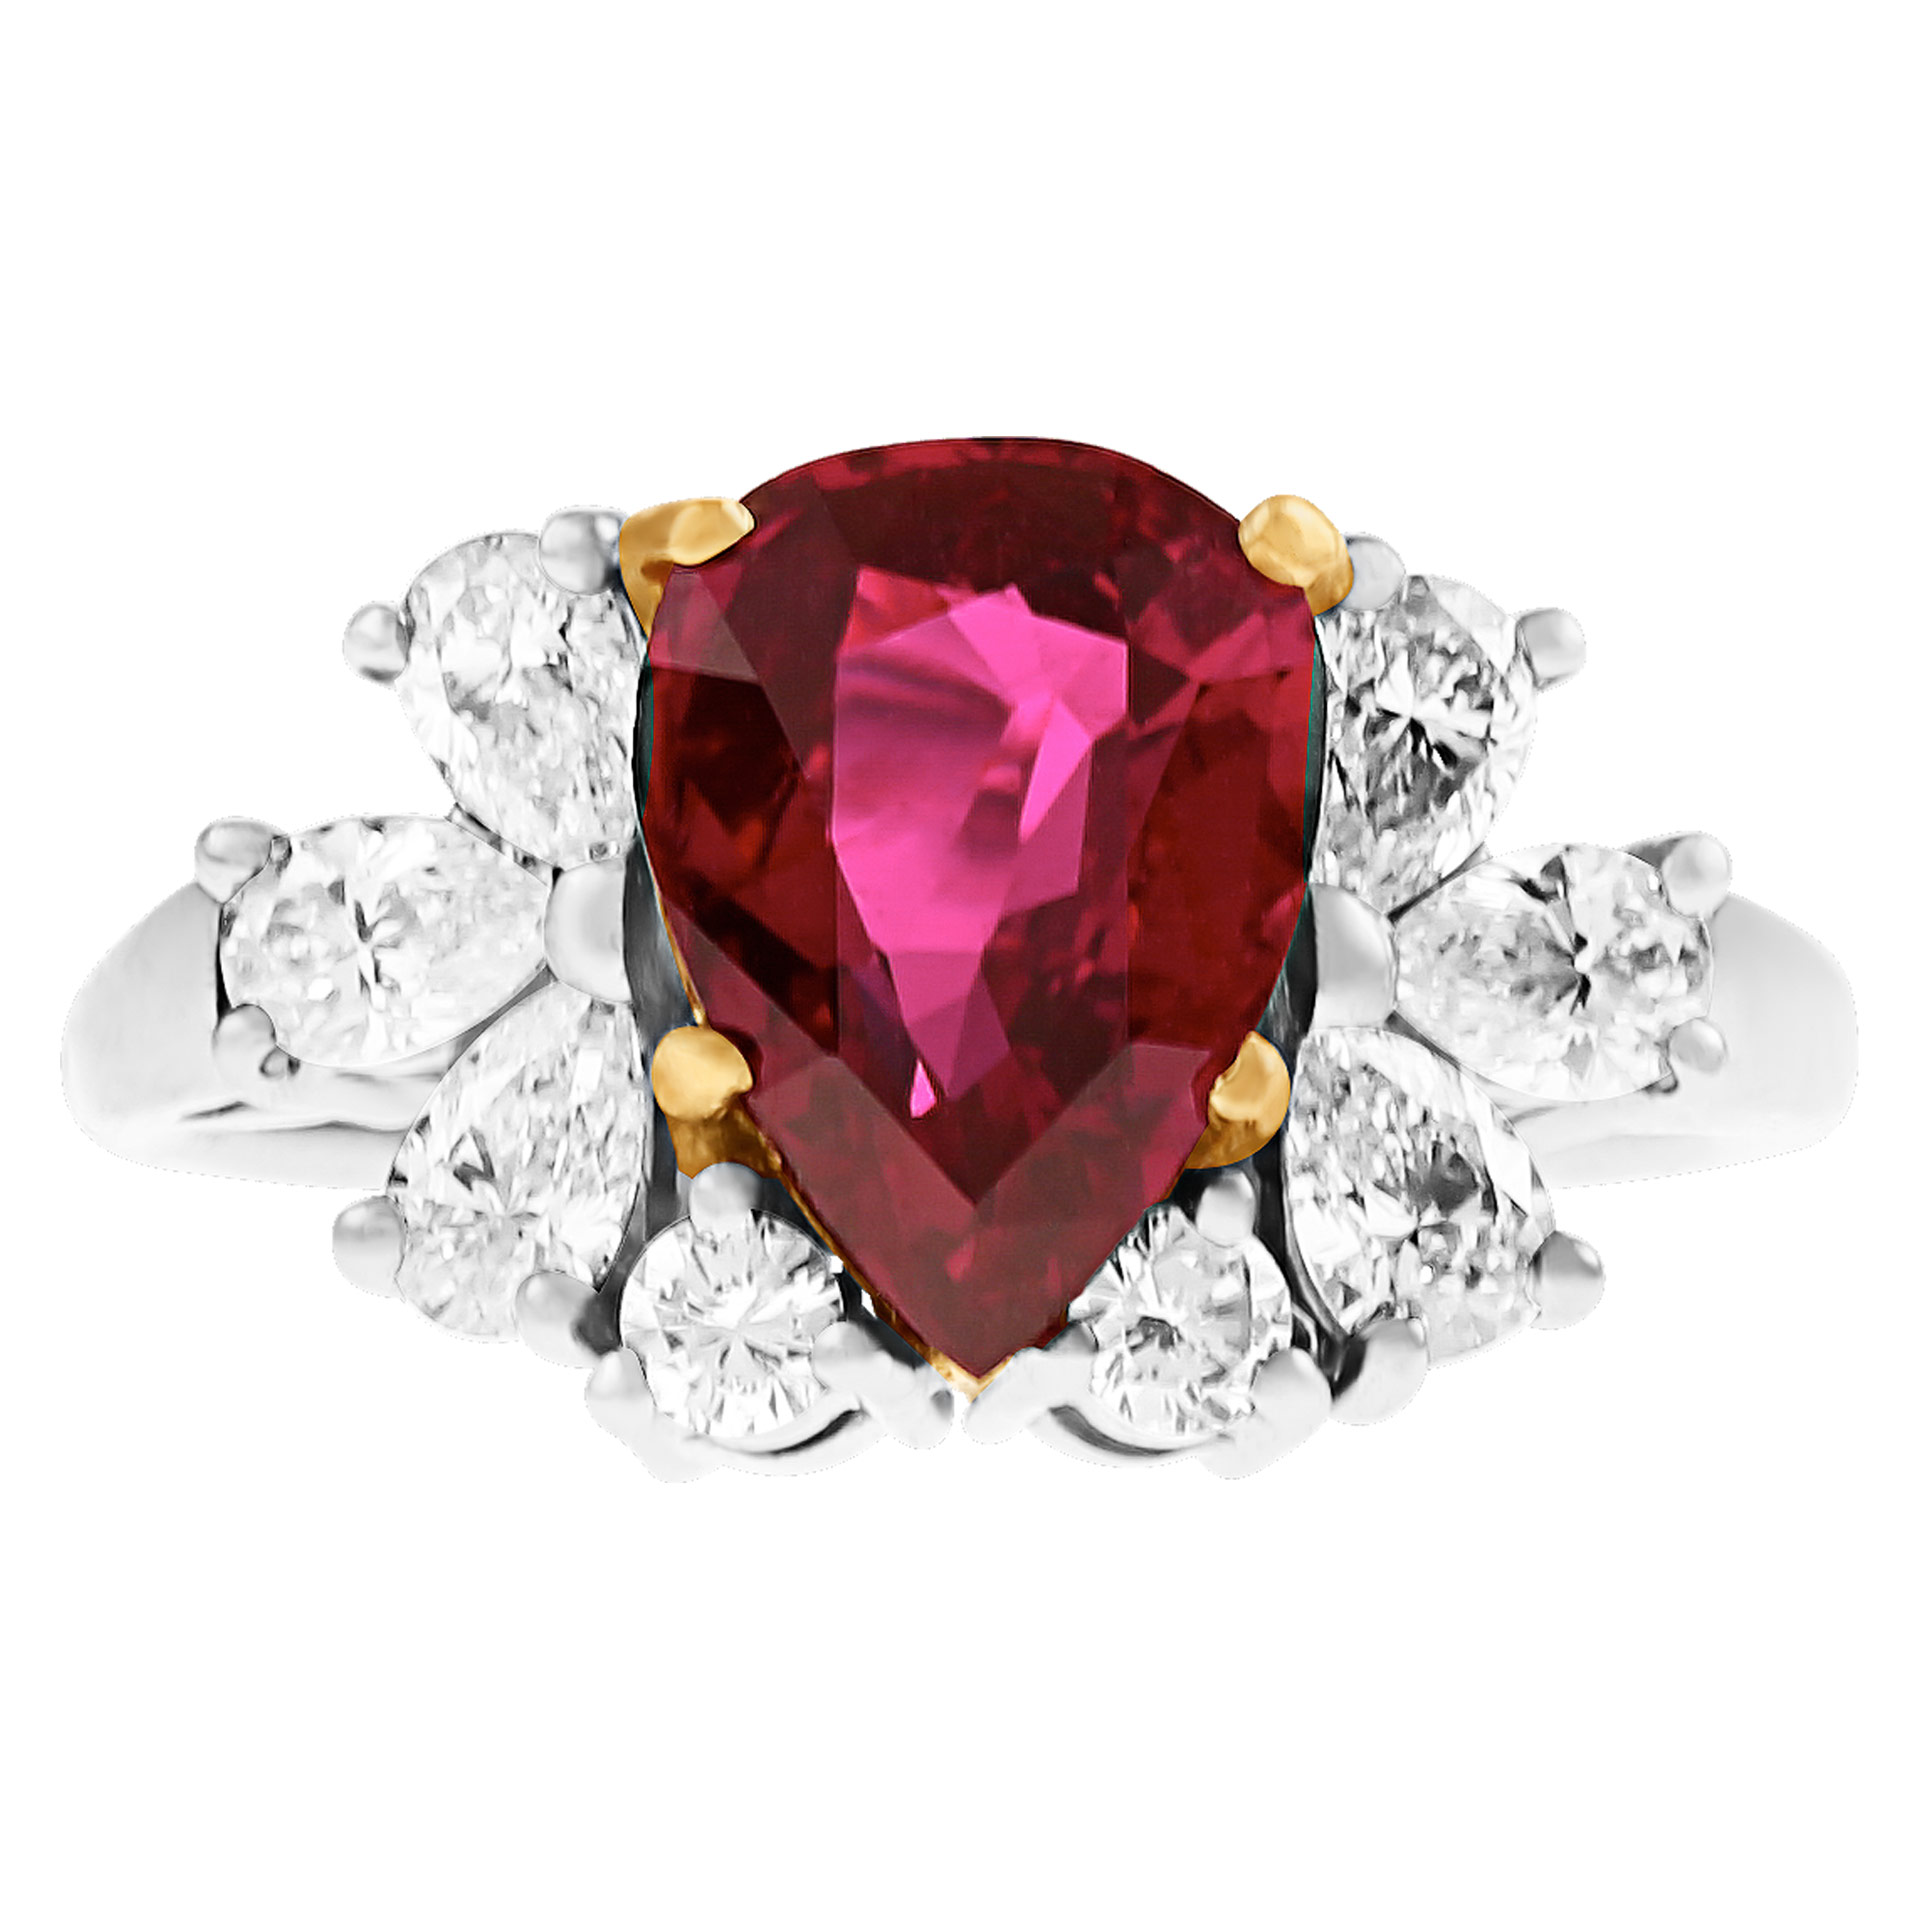 AGL Ceritified Thai-heated ruby ring in 18k & platinum. 2.83 carat pear shaped ruby. 1.50 cts in dia